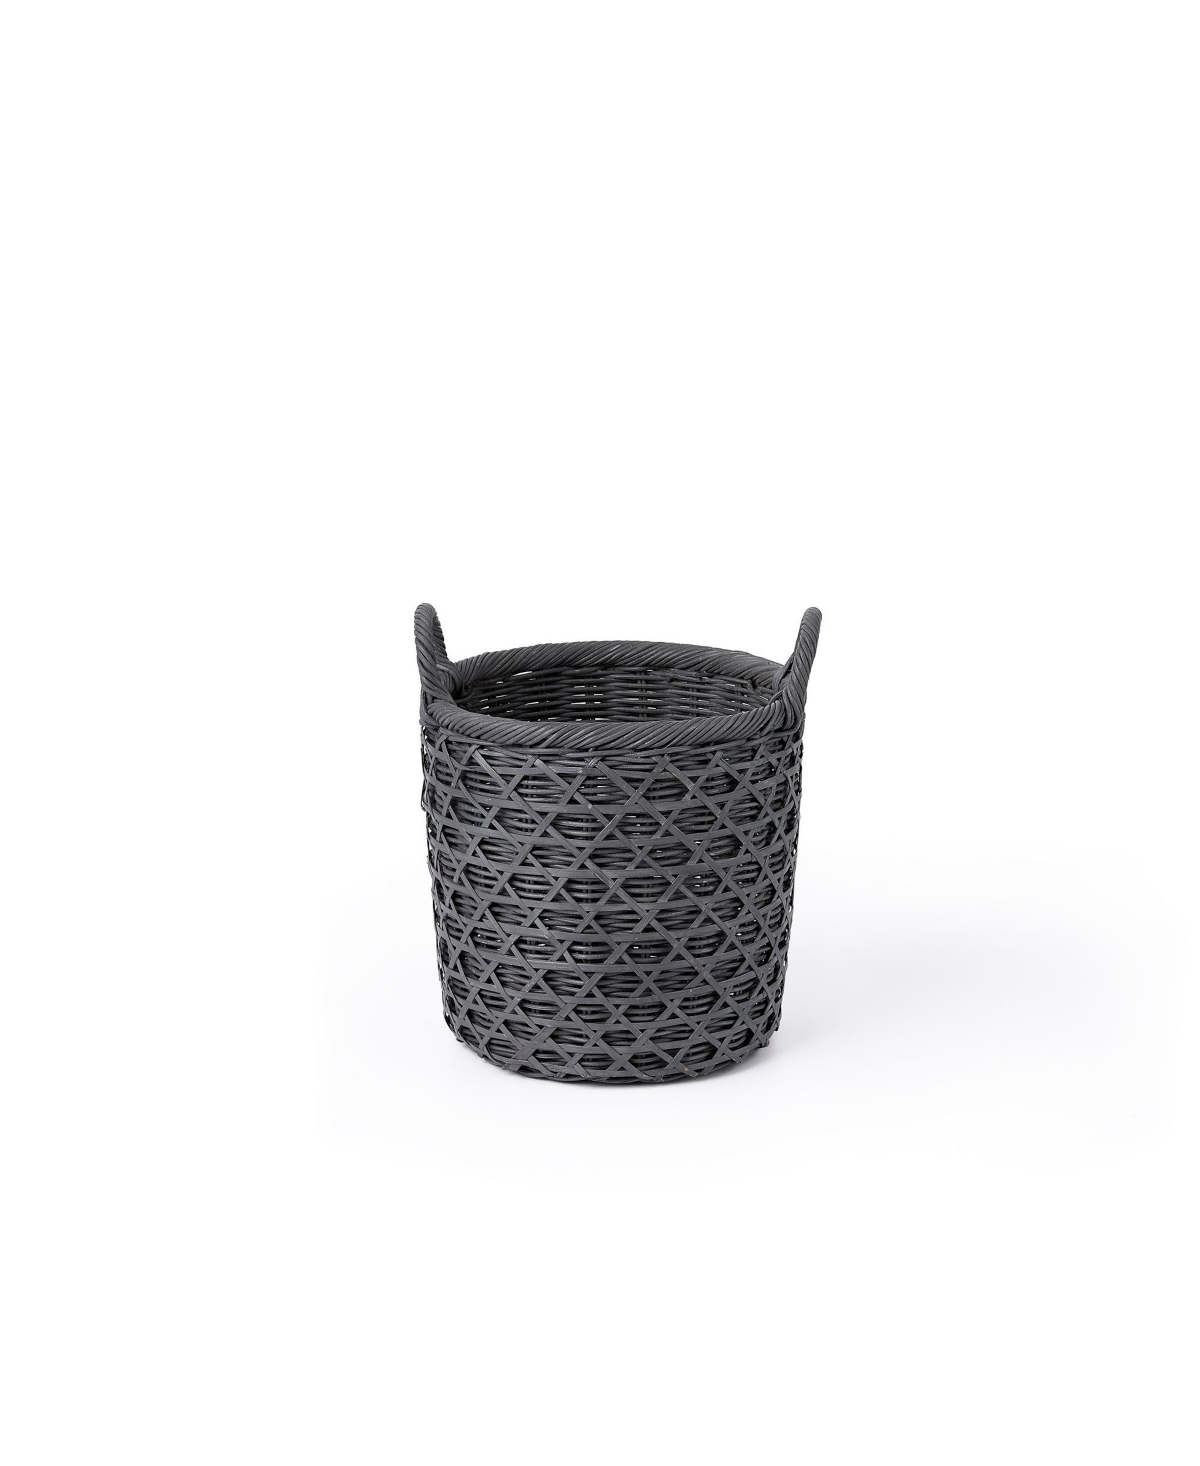 Shop Baum 3 Piece Round Rattan And Bamboo Caning Basket Set With Ear Handles In Gray